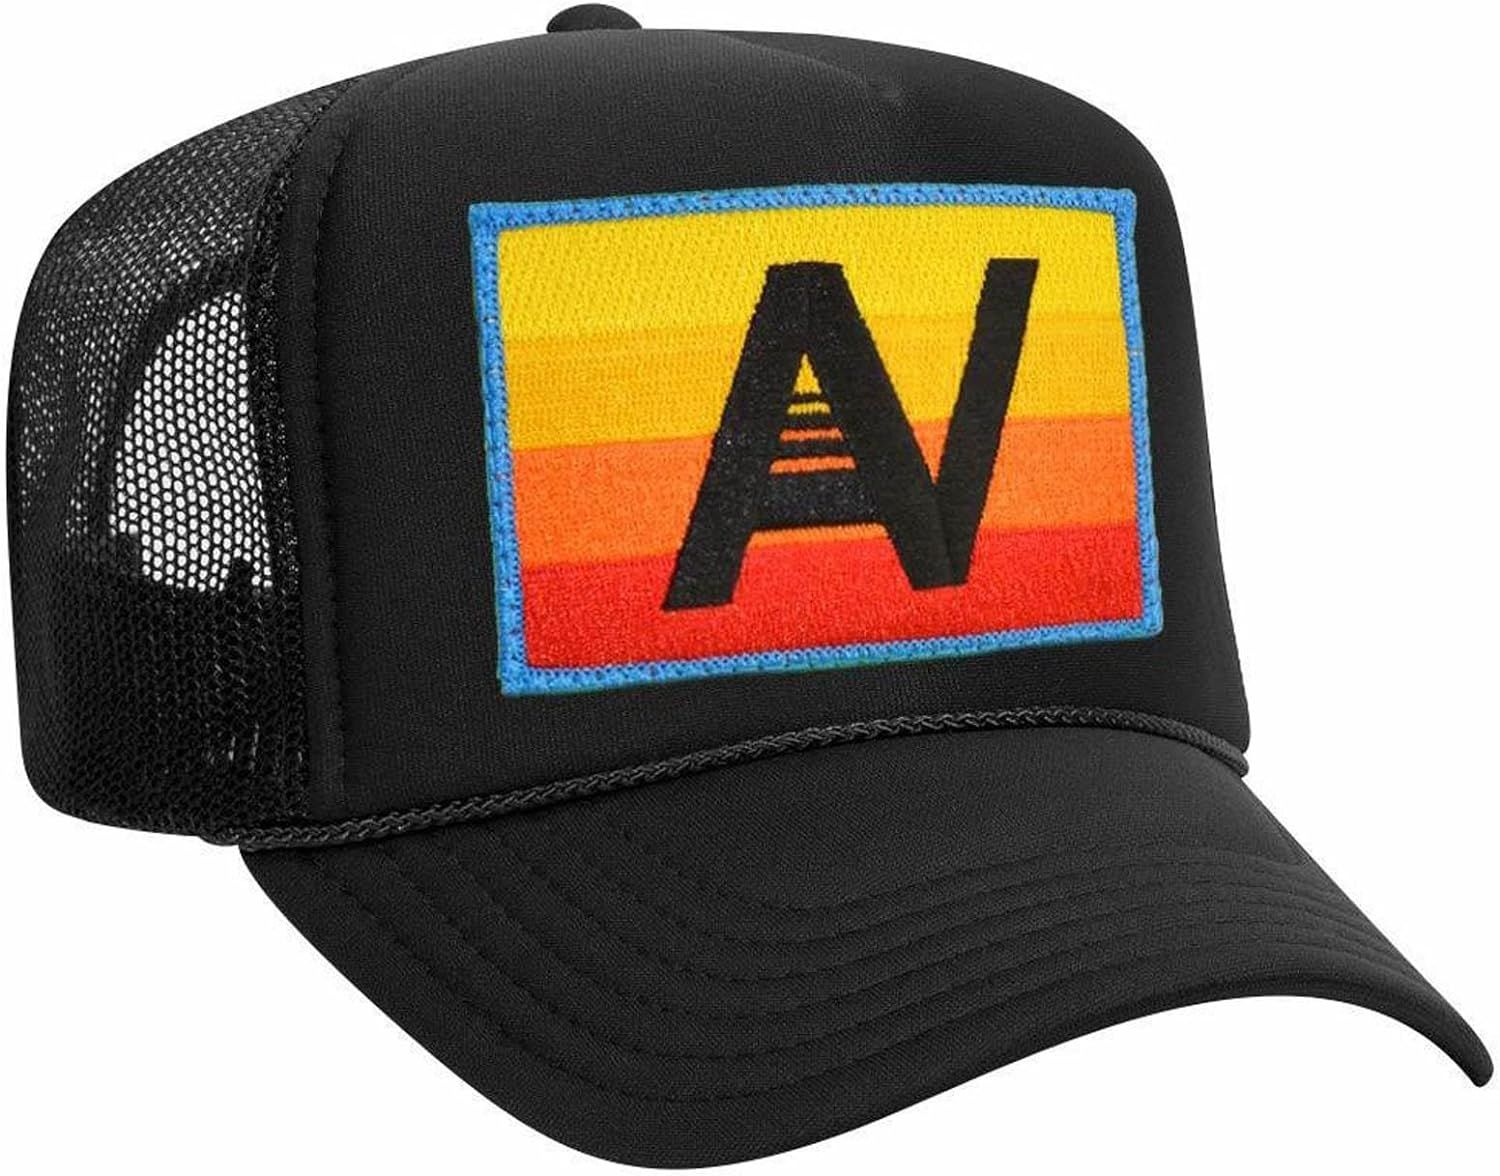 Trucker Hat - Vintage Signature Outdoor for Men Women Embroidered Breathable Mesh Back Adjustable | Amazon (US)